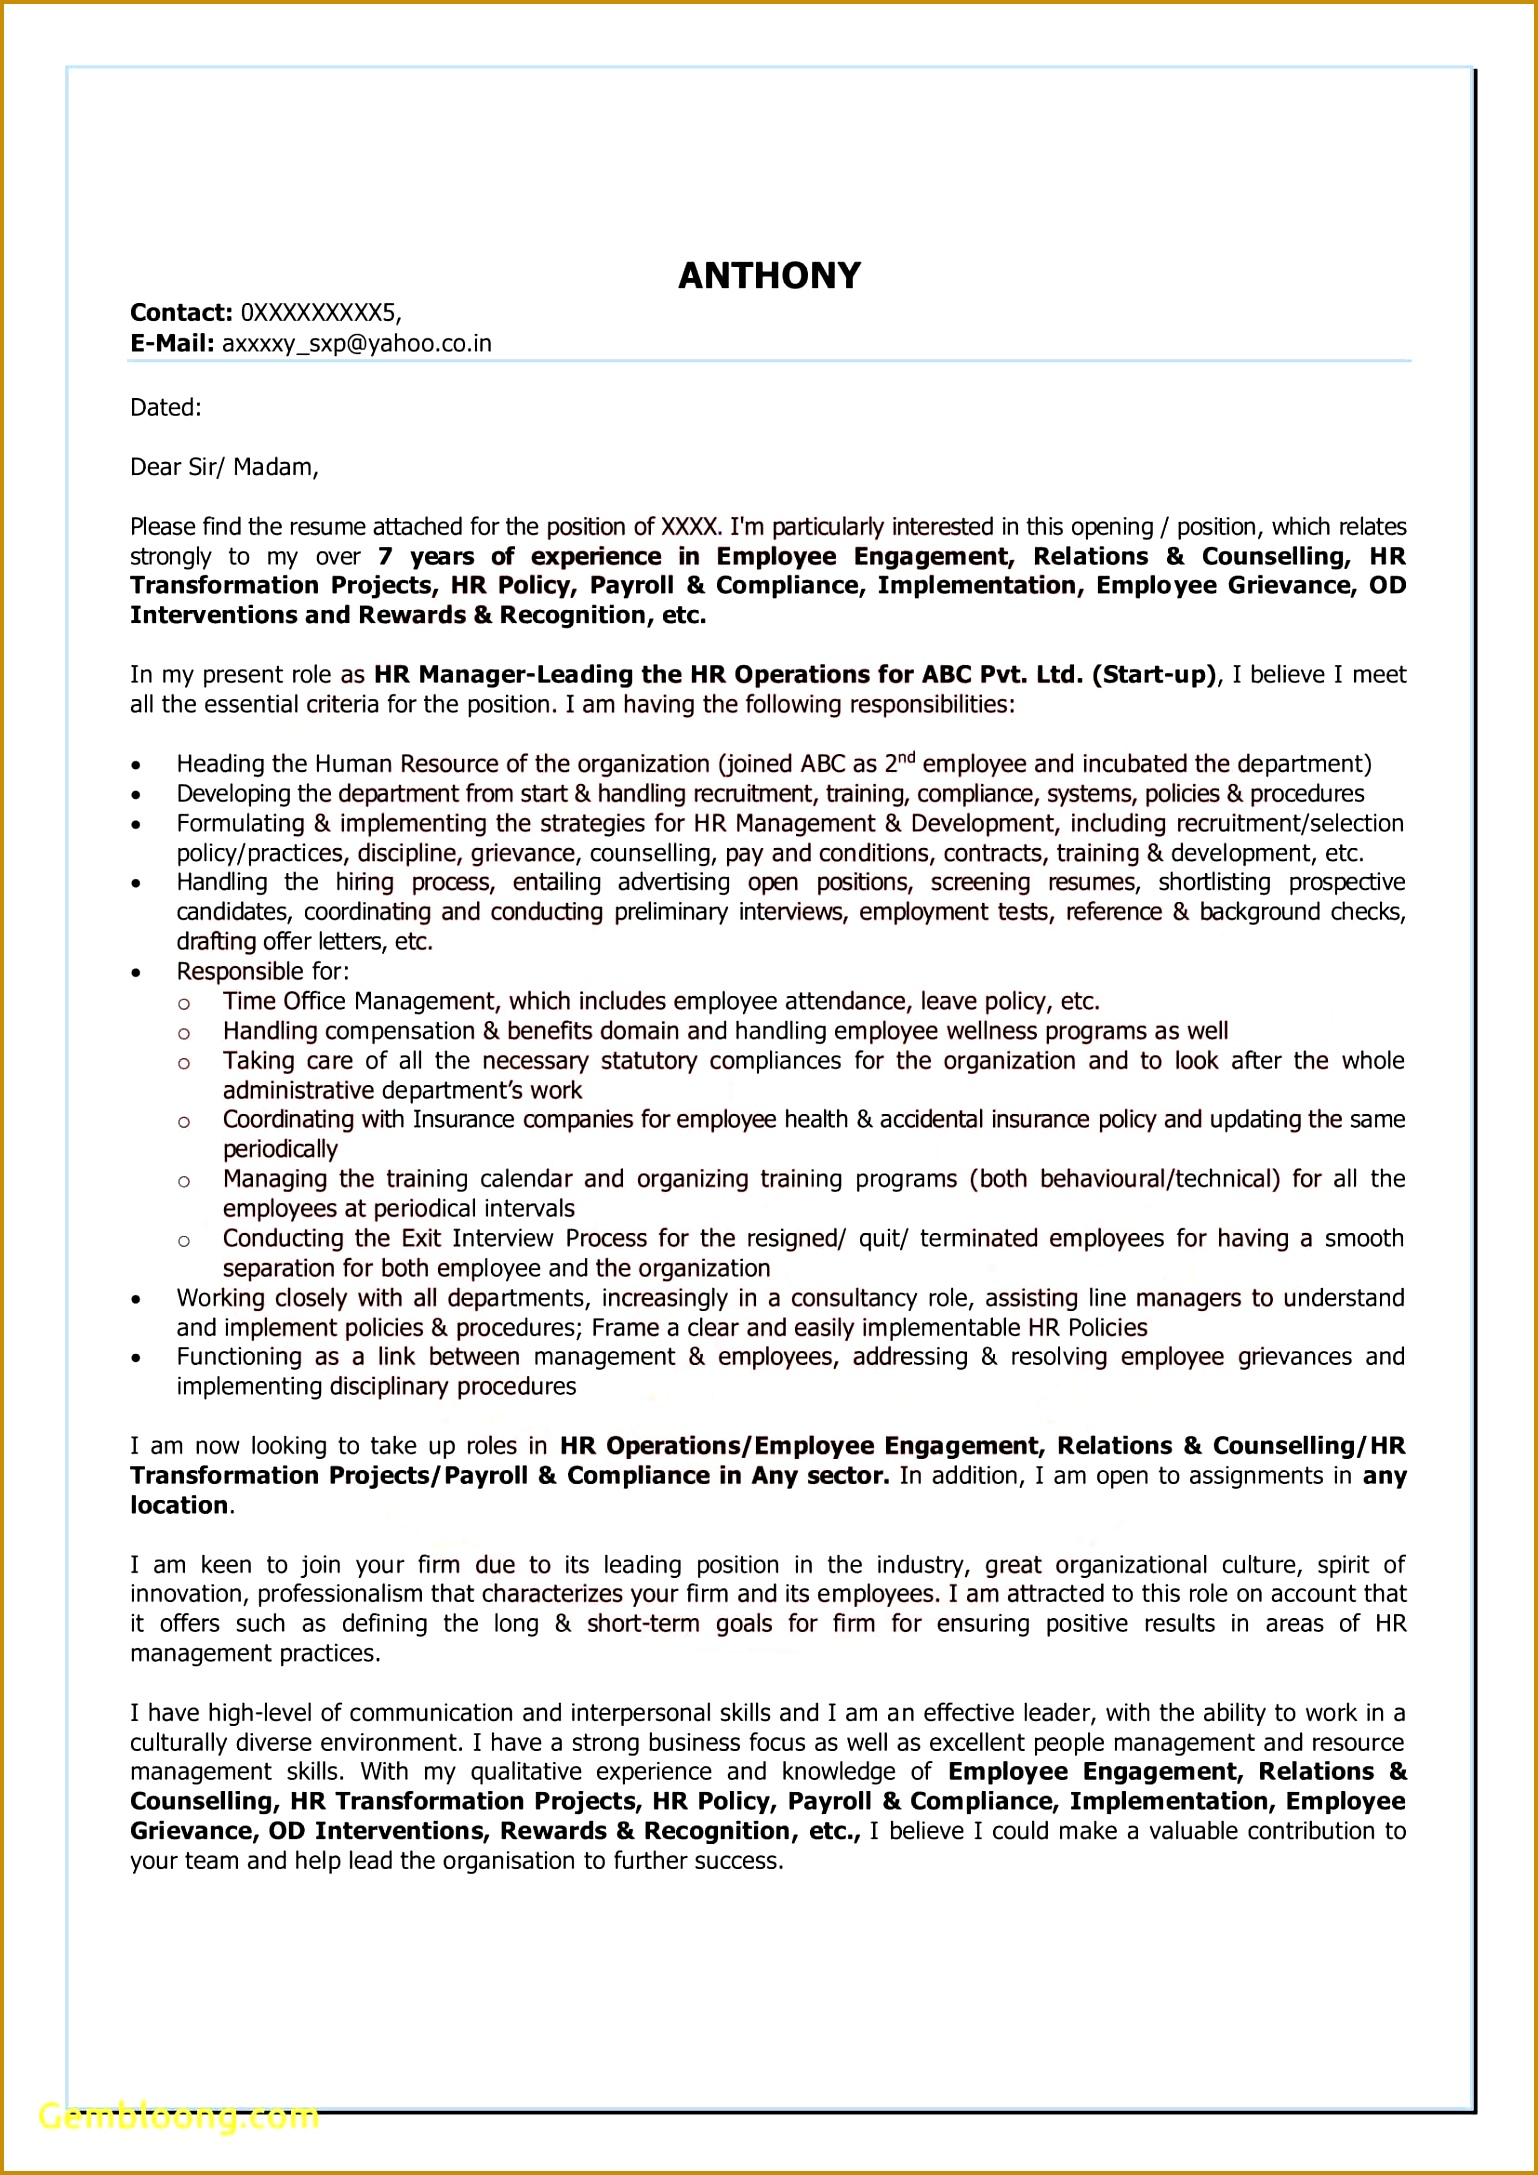 Best Cover Letter Awesome April 2018 Luxury Letter 21751538